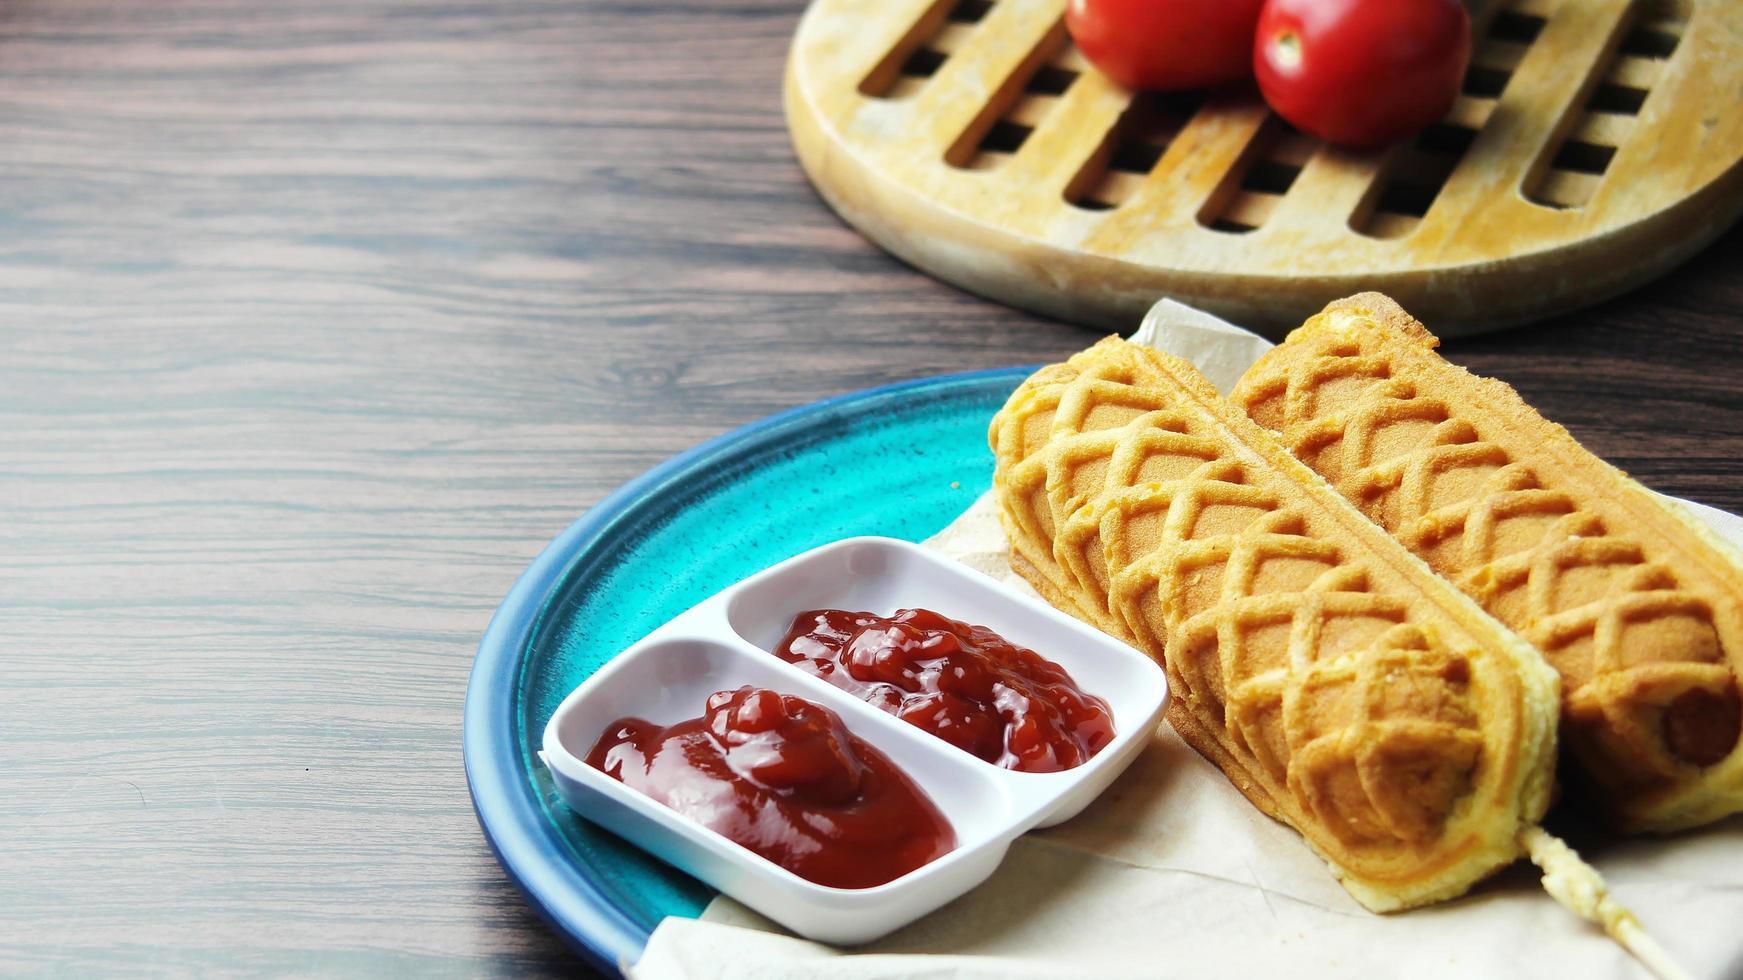 waffle sticks Corn dogs Hot Dog Waffles on a Stick  Ketchup on a wooden table photo